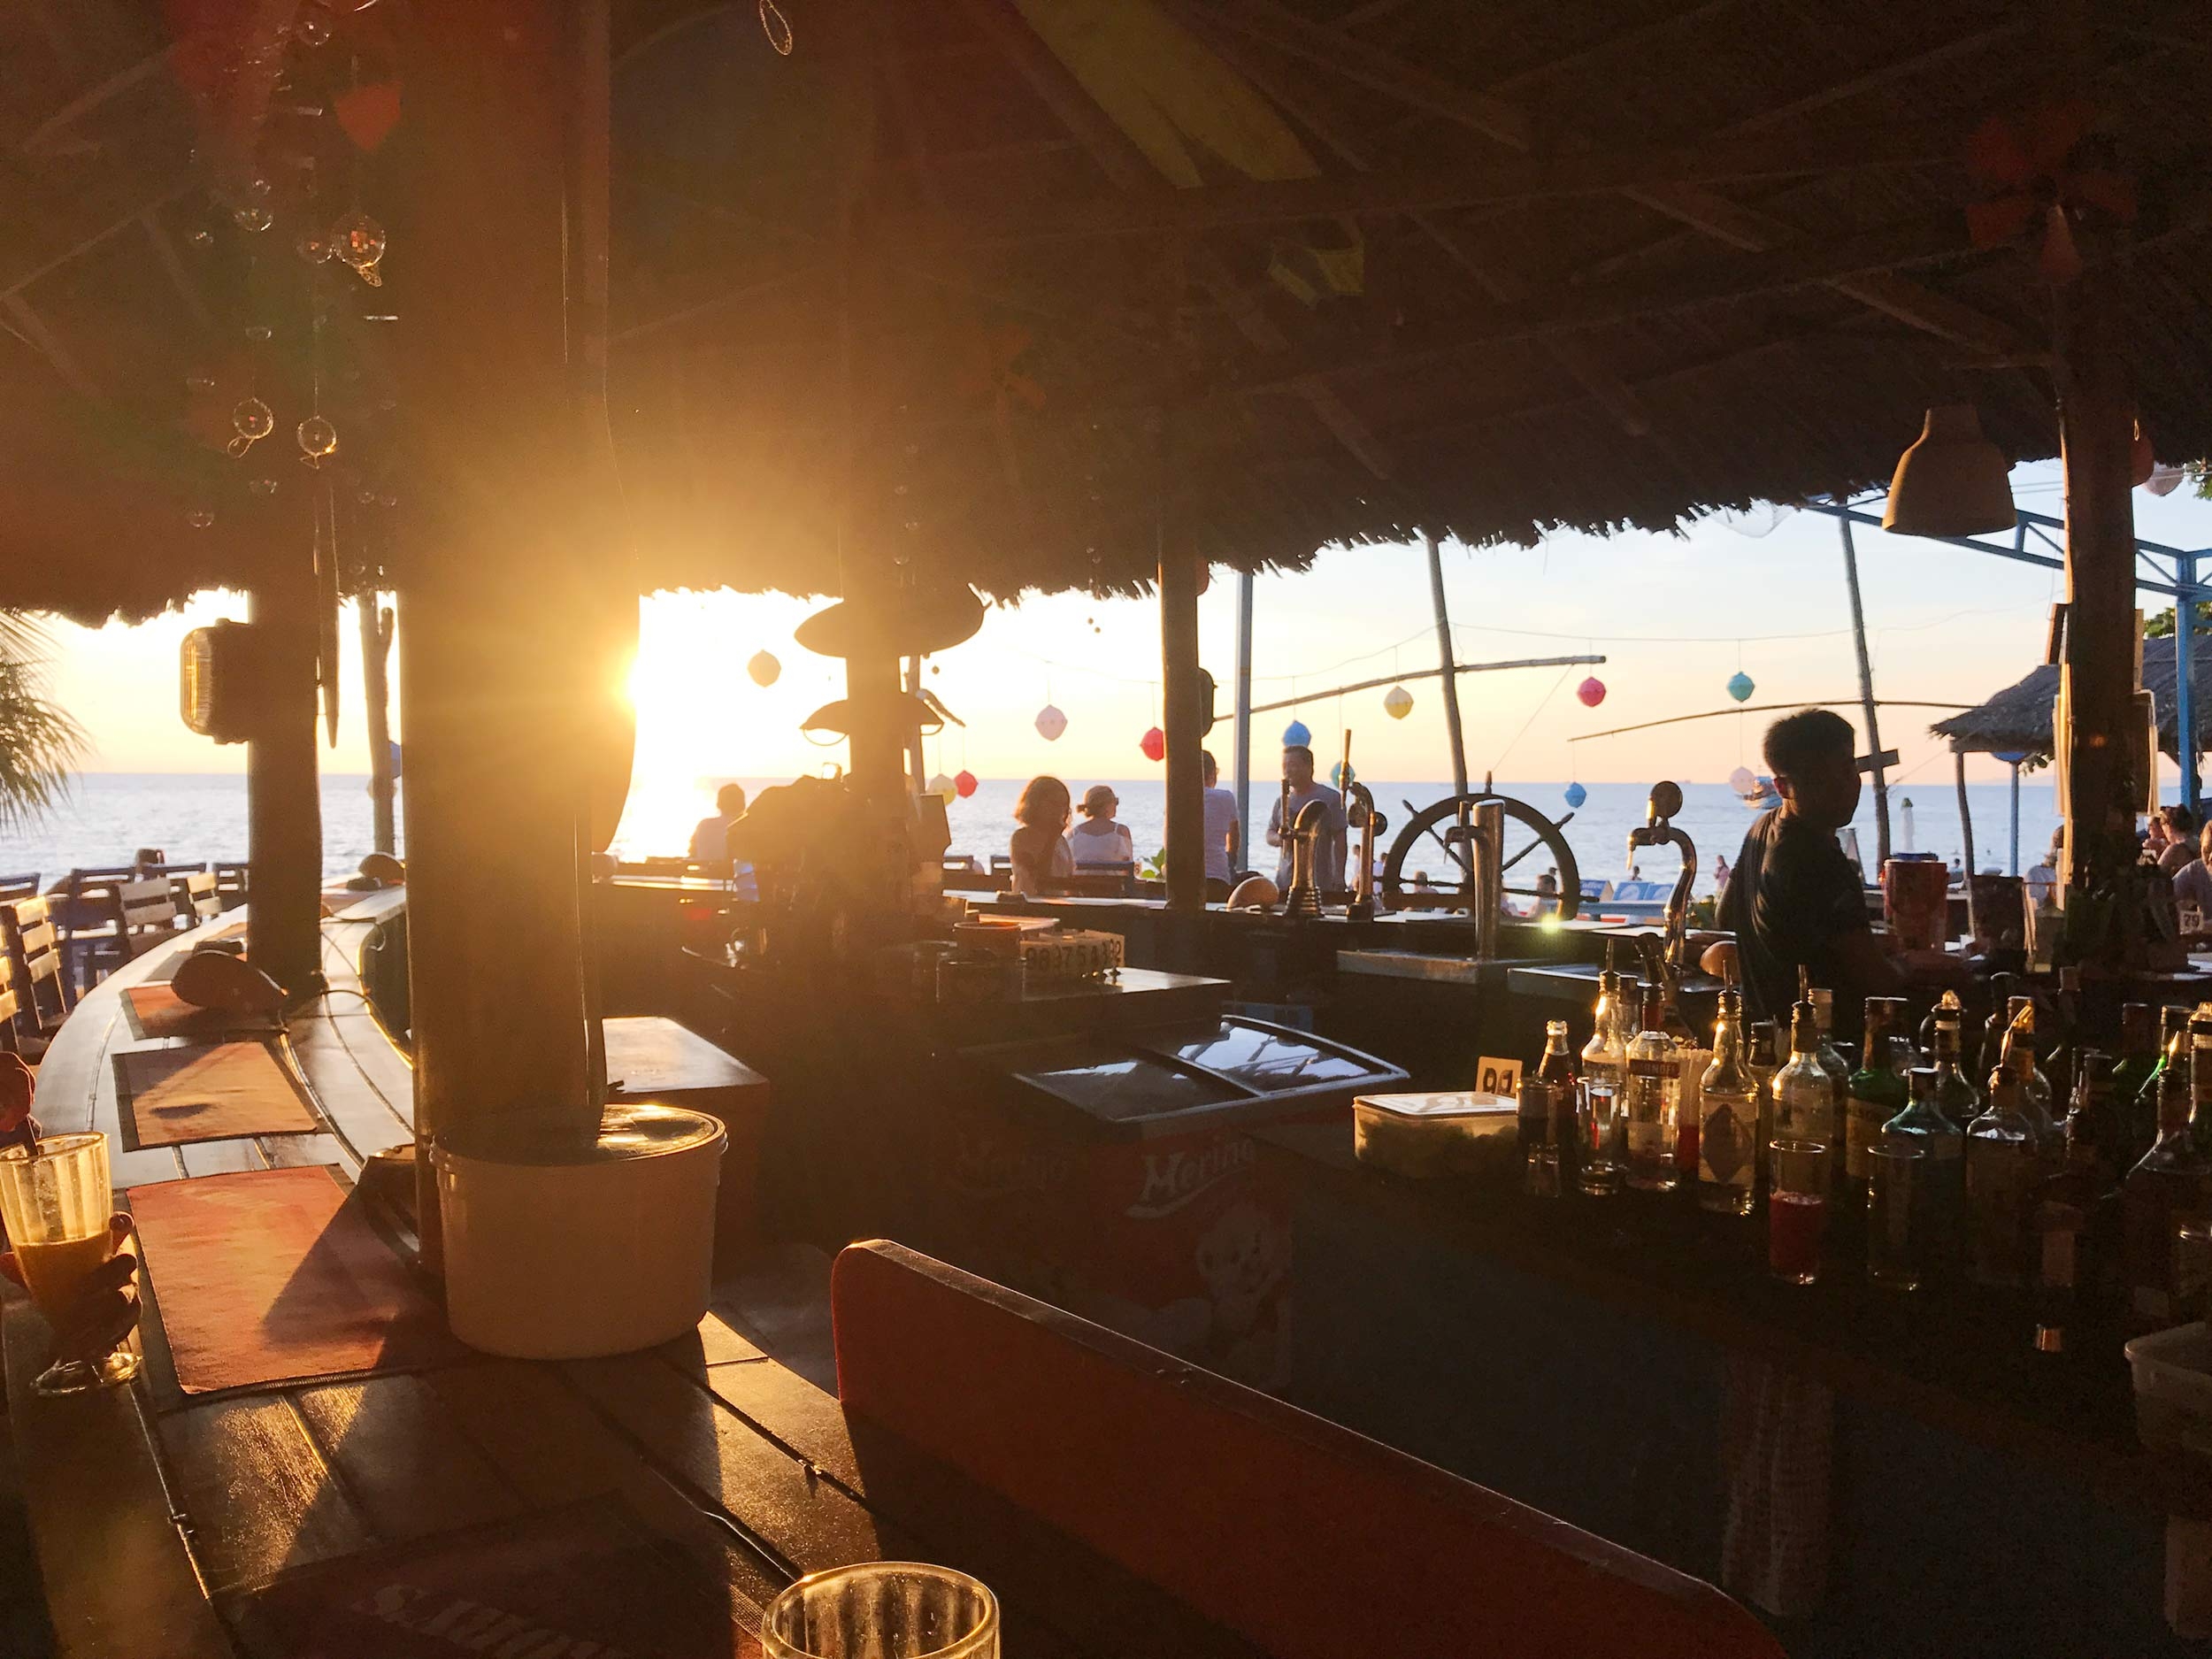 Rory’s Beach Bar sits by the water and is sun kissed as the evening rolls in